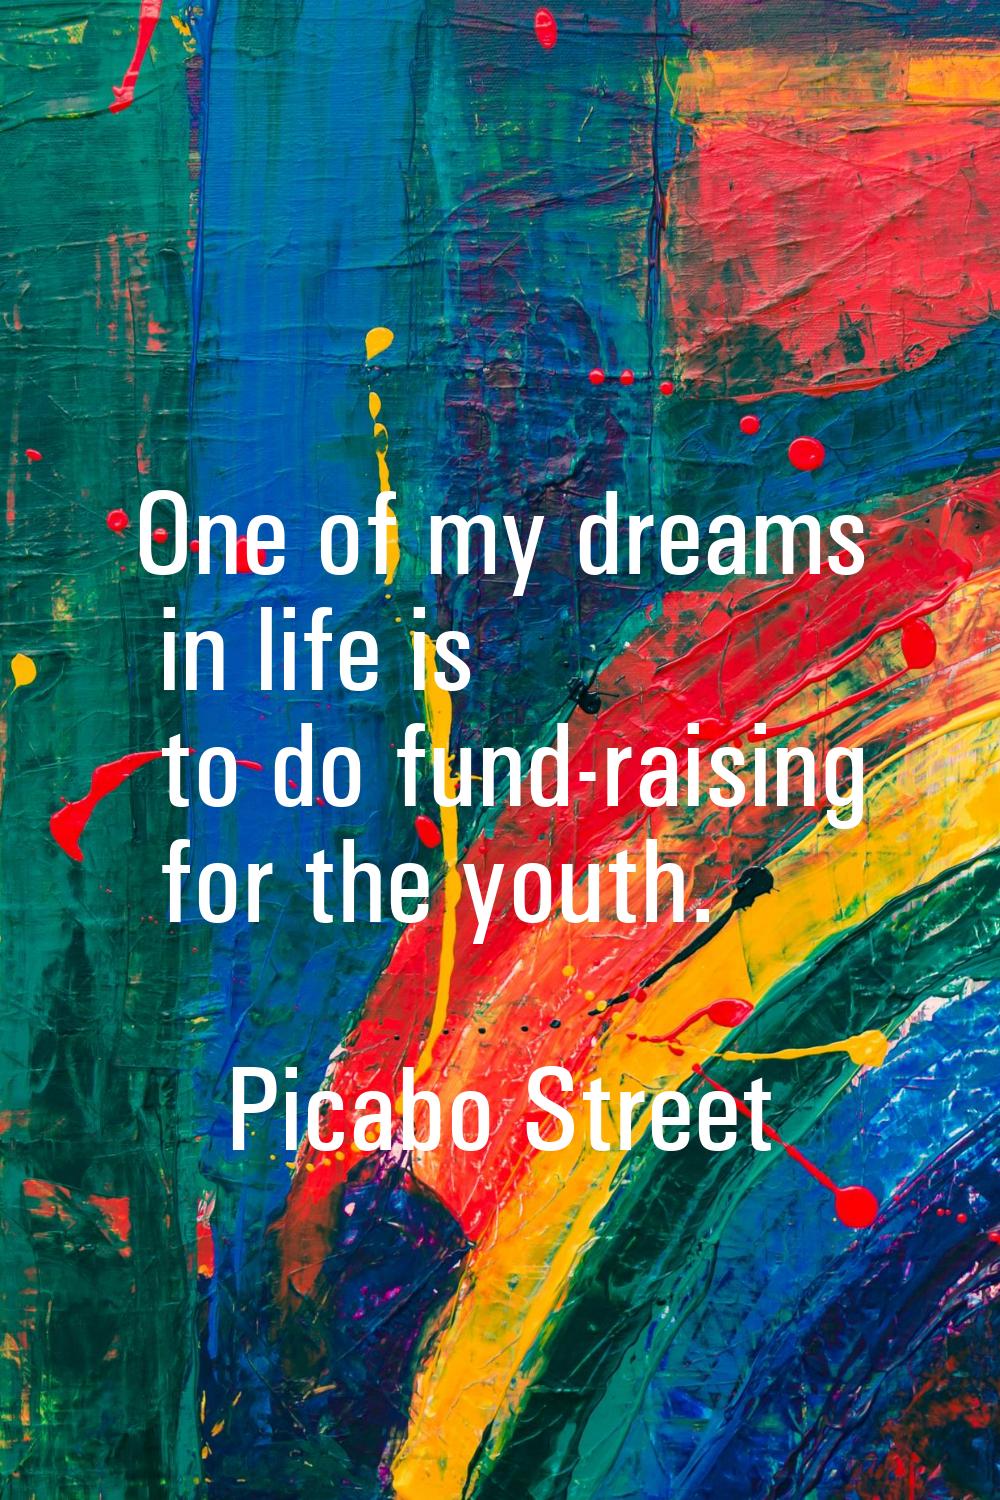 One of my dreams in life is to do fund-raising for the youth.